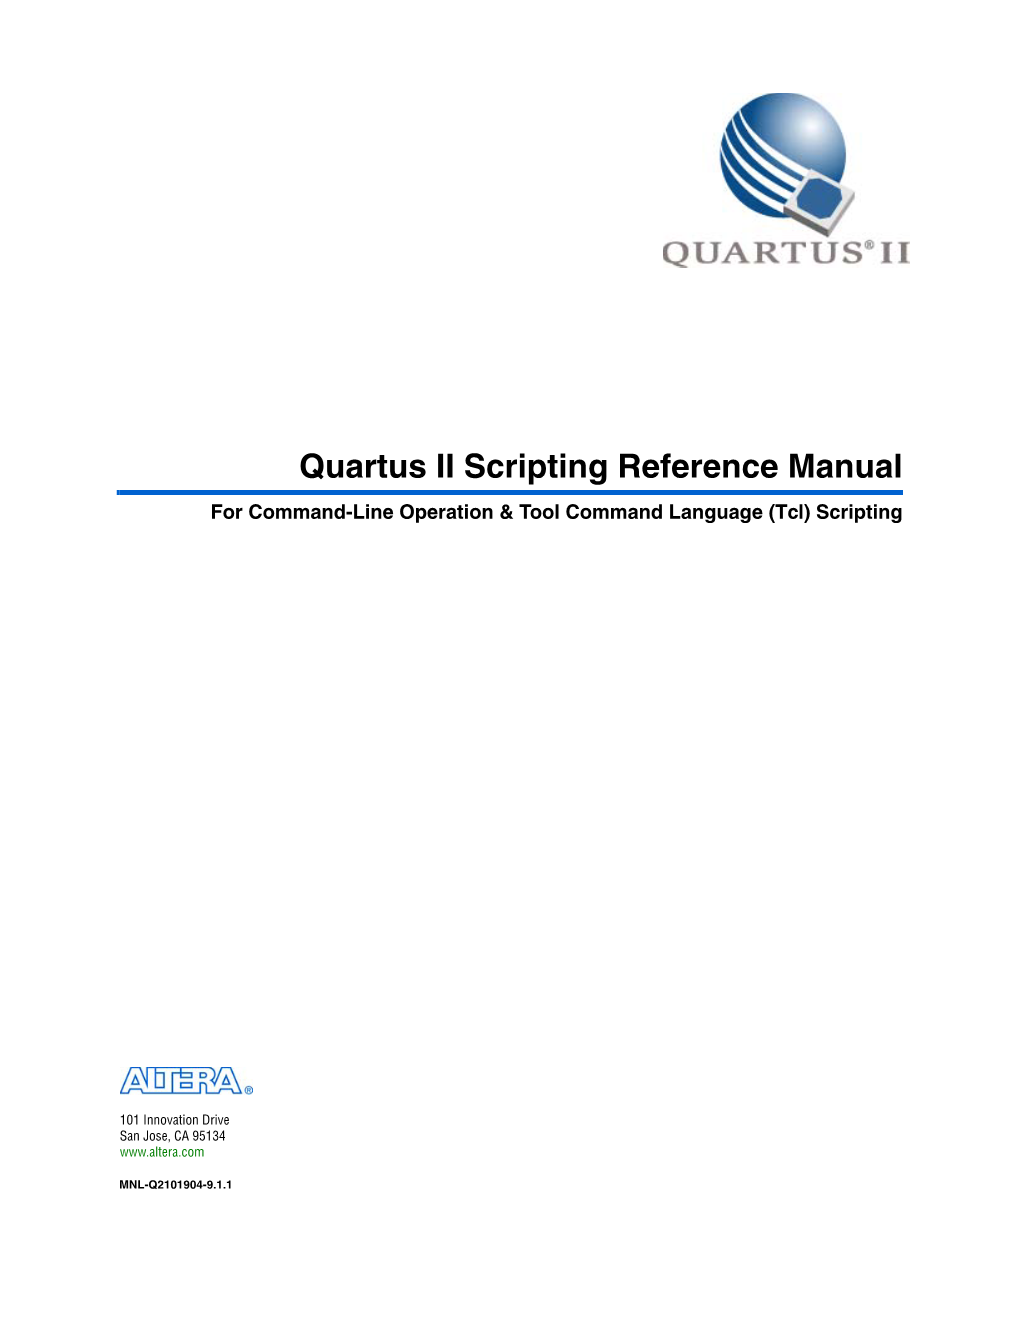 Quartus II Scripting Reference Manual for Command-Line Operation & Tool Command Language (Tcl) Scripting